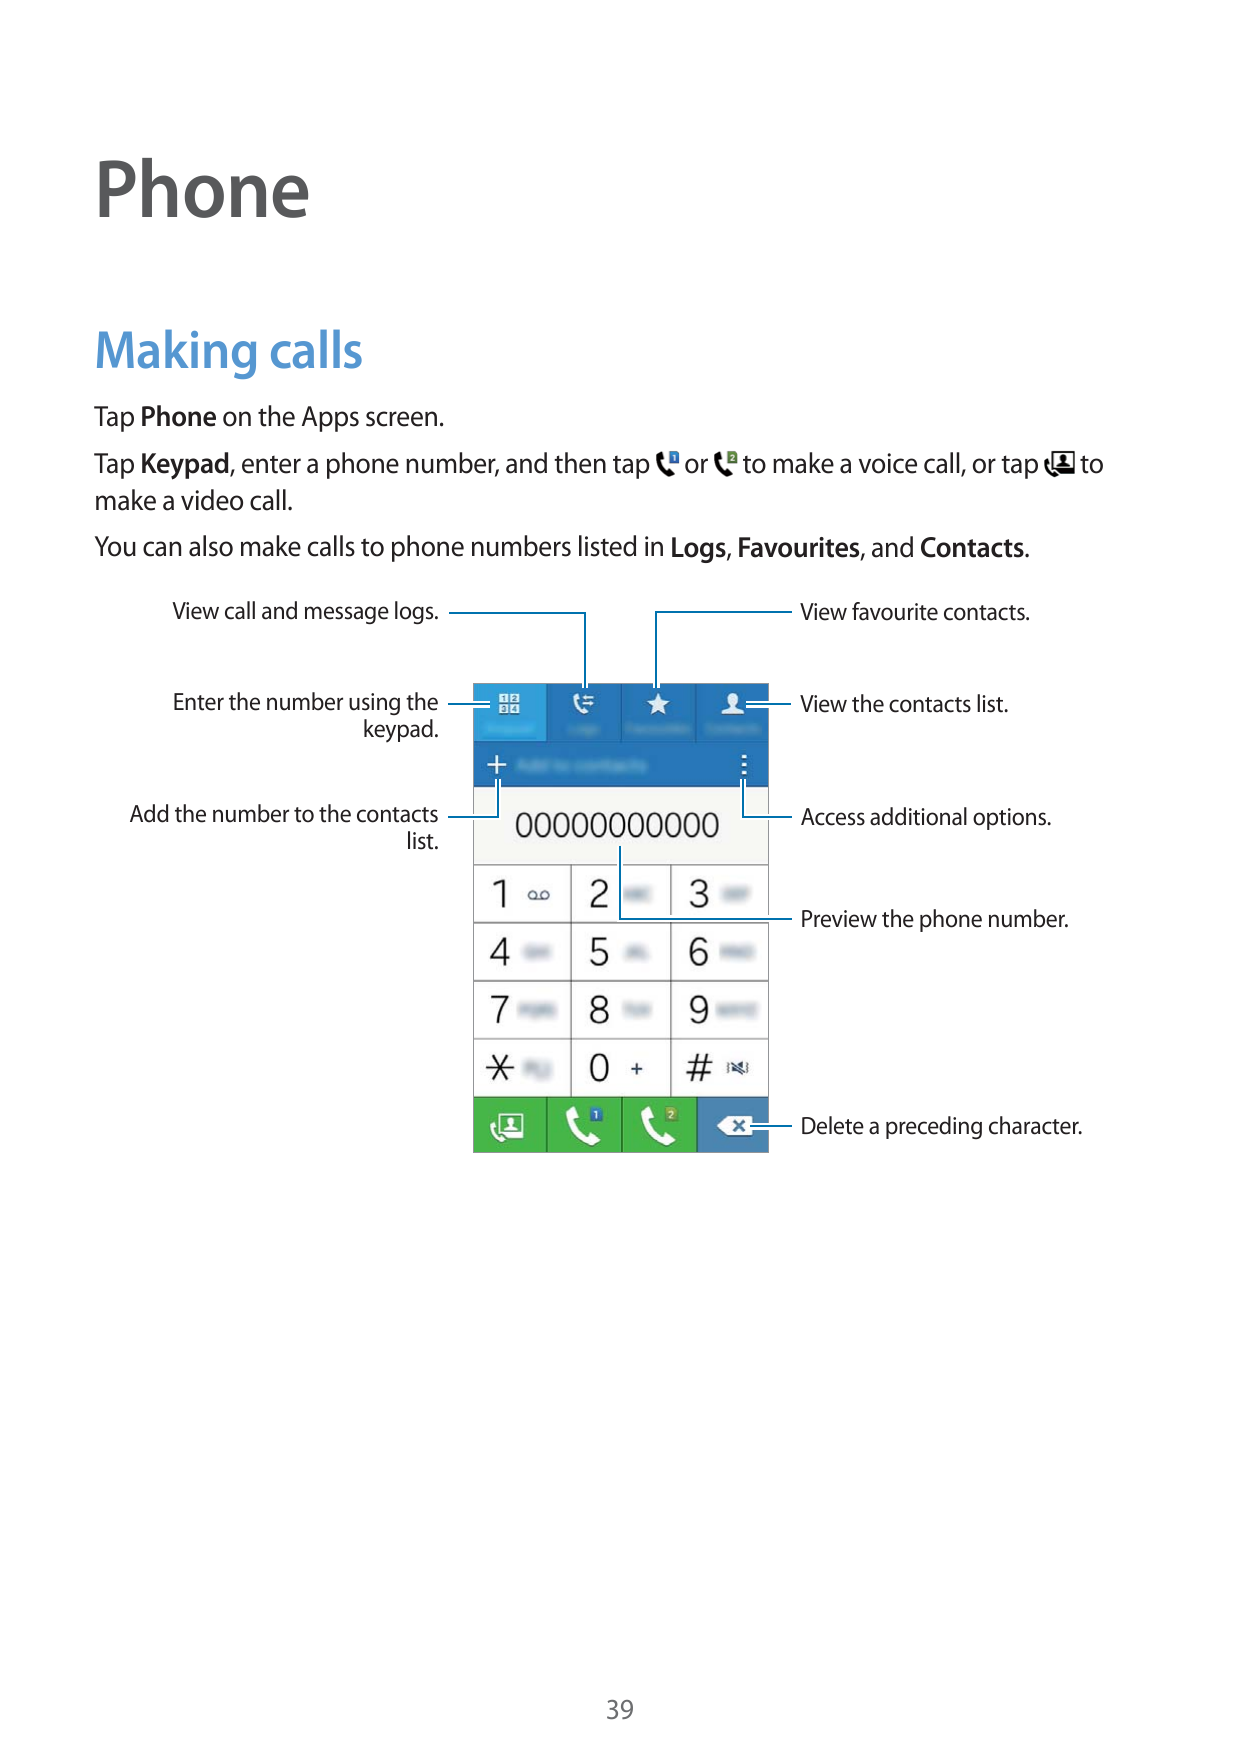 PhoneMaking callsTap Phone on the Apps screen.Tap Keypad, enter a phone number, and then tapmake a video call.orto make a voice 